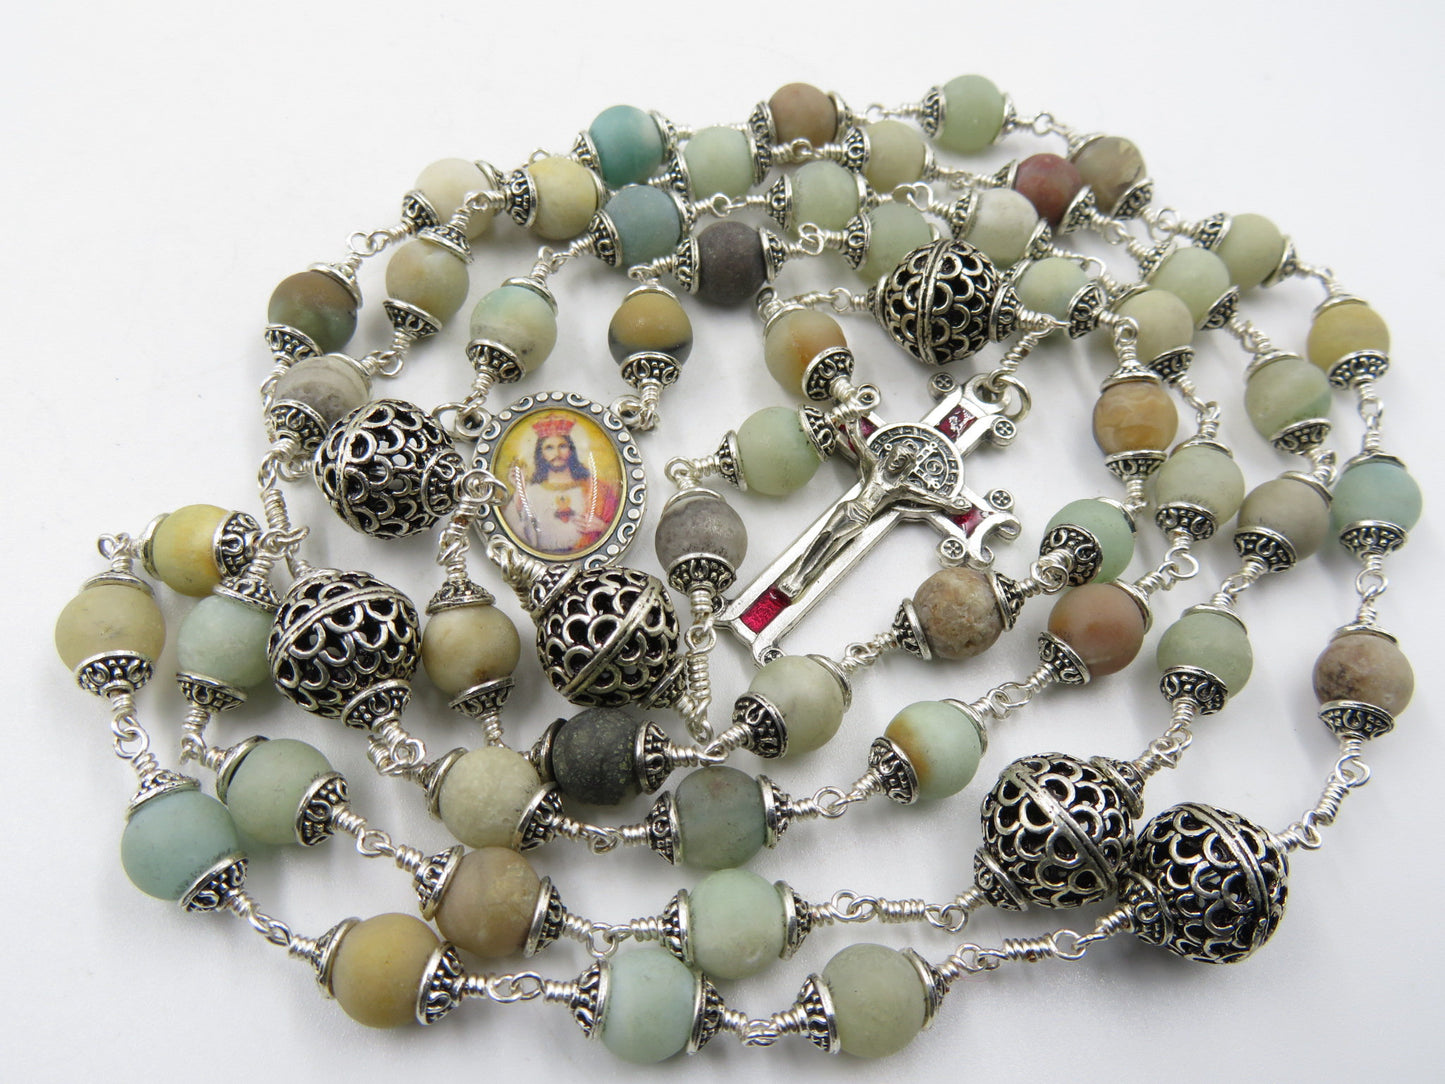 Unbreakable wire wrapped Rosary Beads, Sacred Heart Rosaries, St Benedict Rosary, Amazonite Gemstone prayer beads, Religious Wedding gift